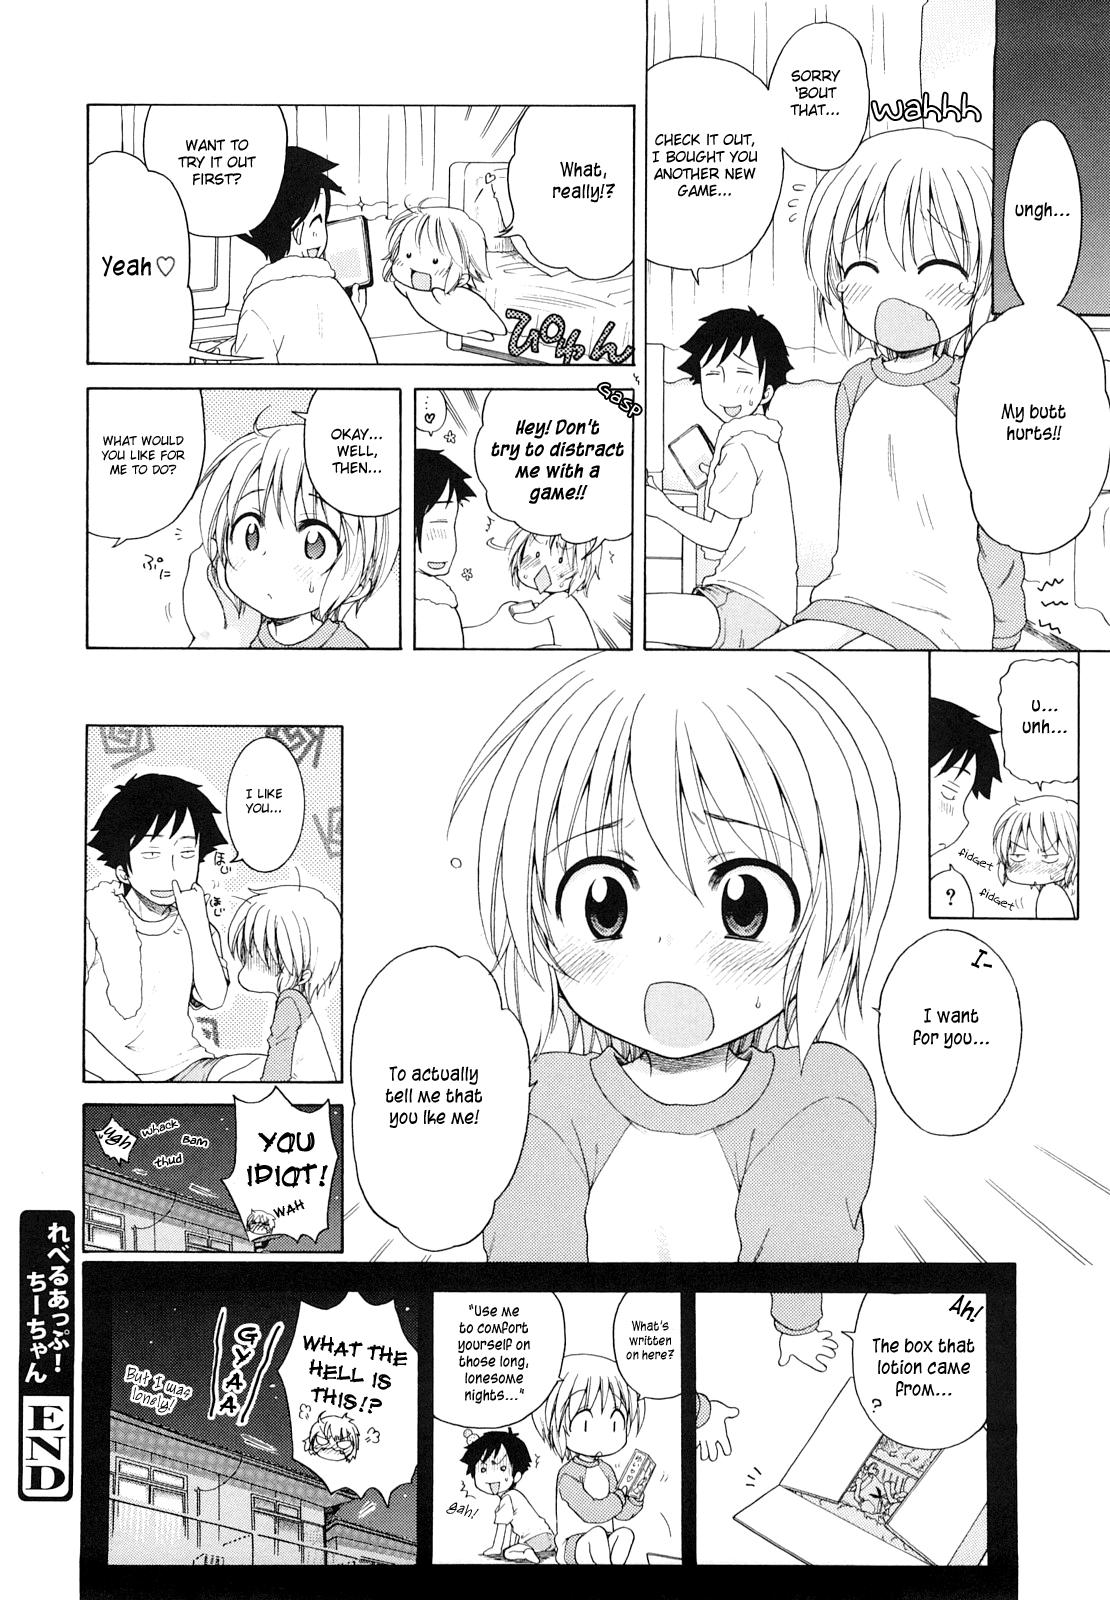 Large Level Up! Chii-chan Dancing - Page 23